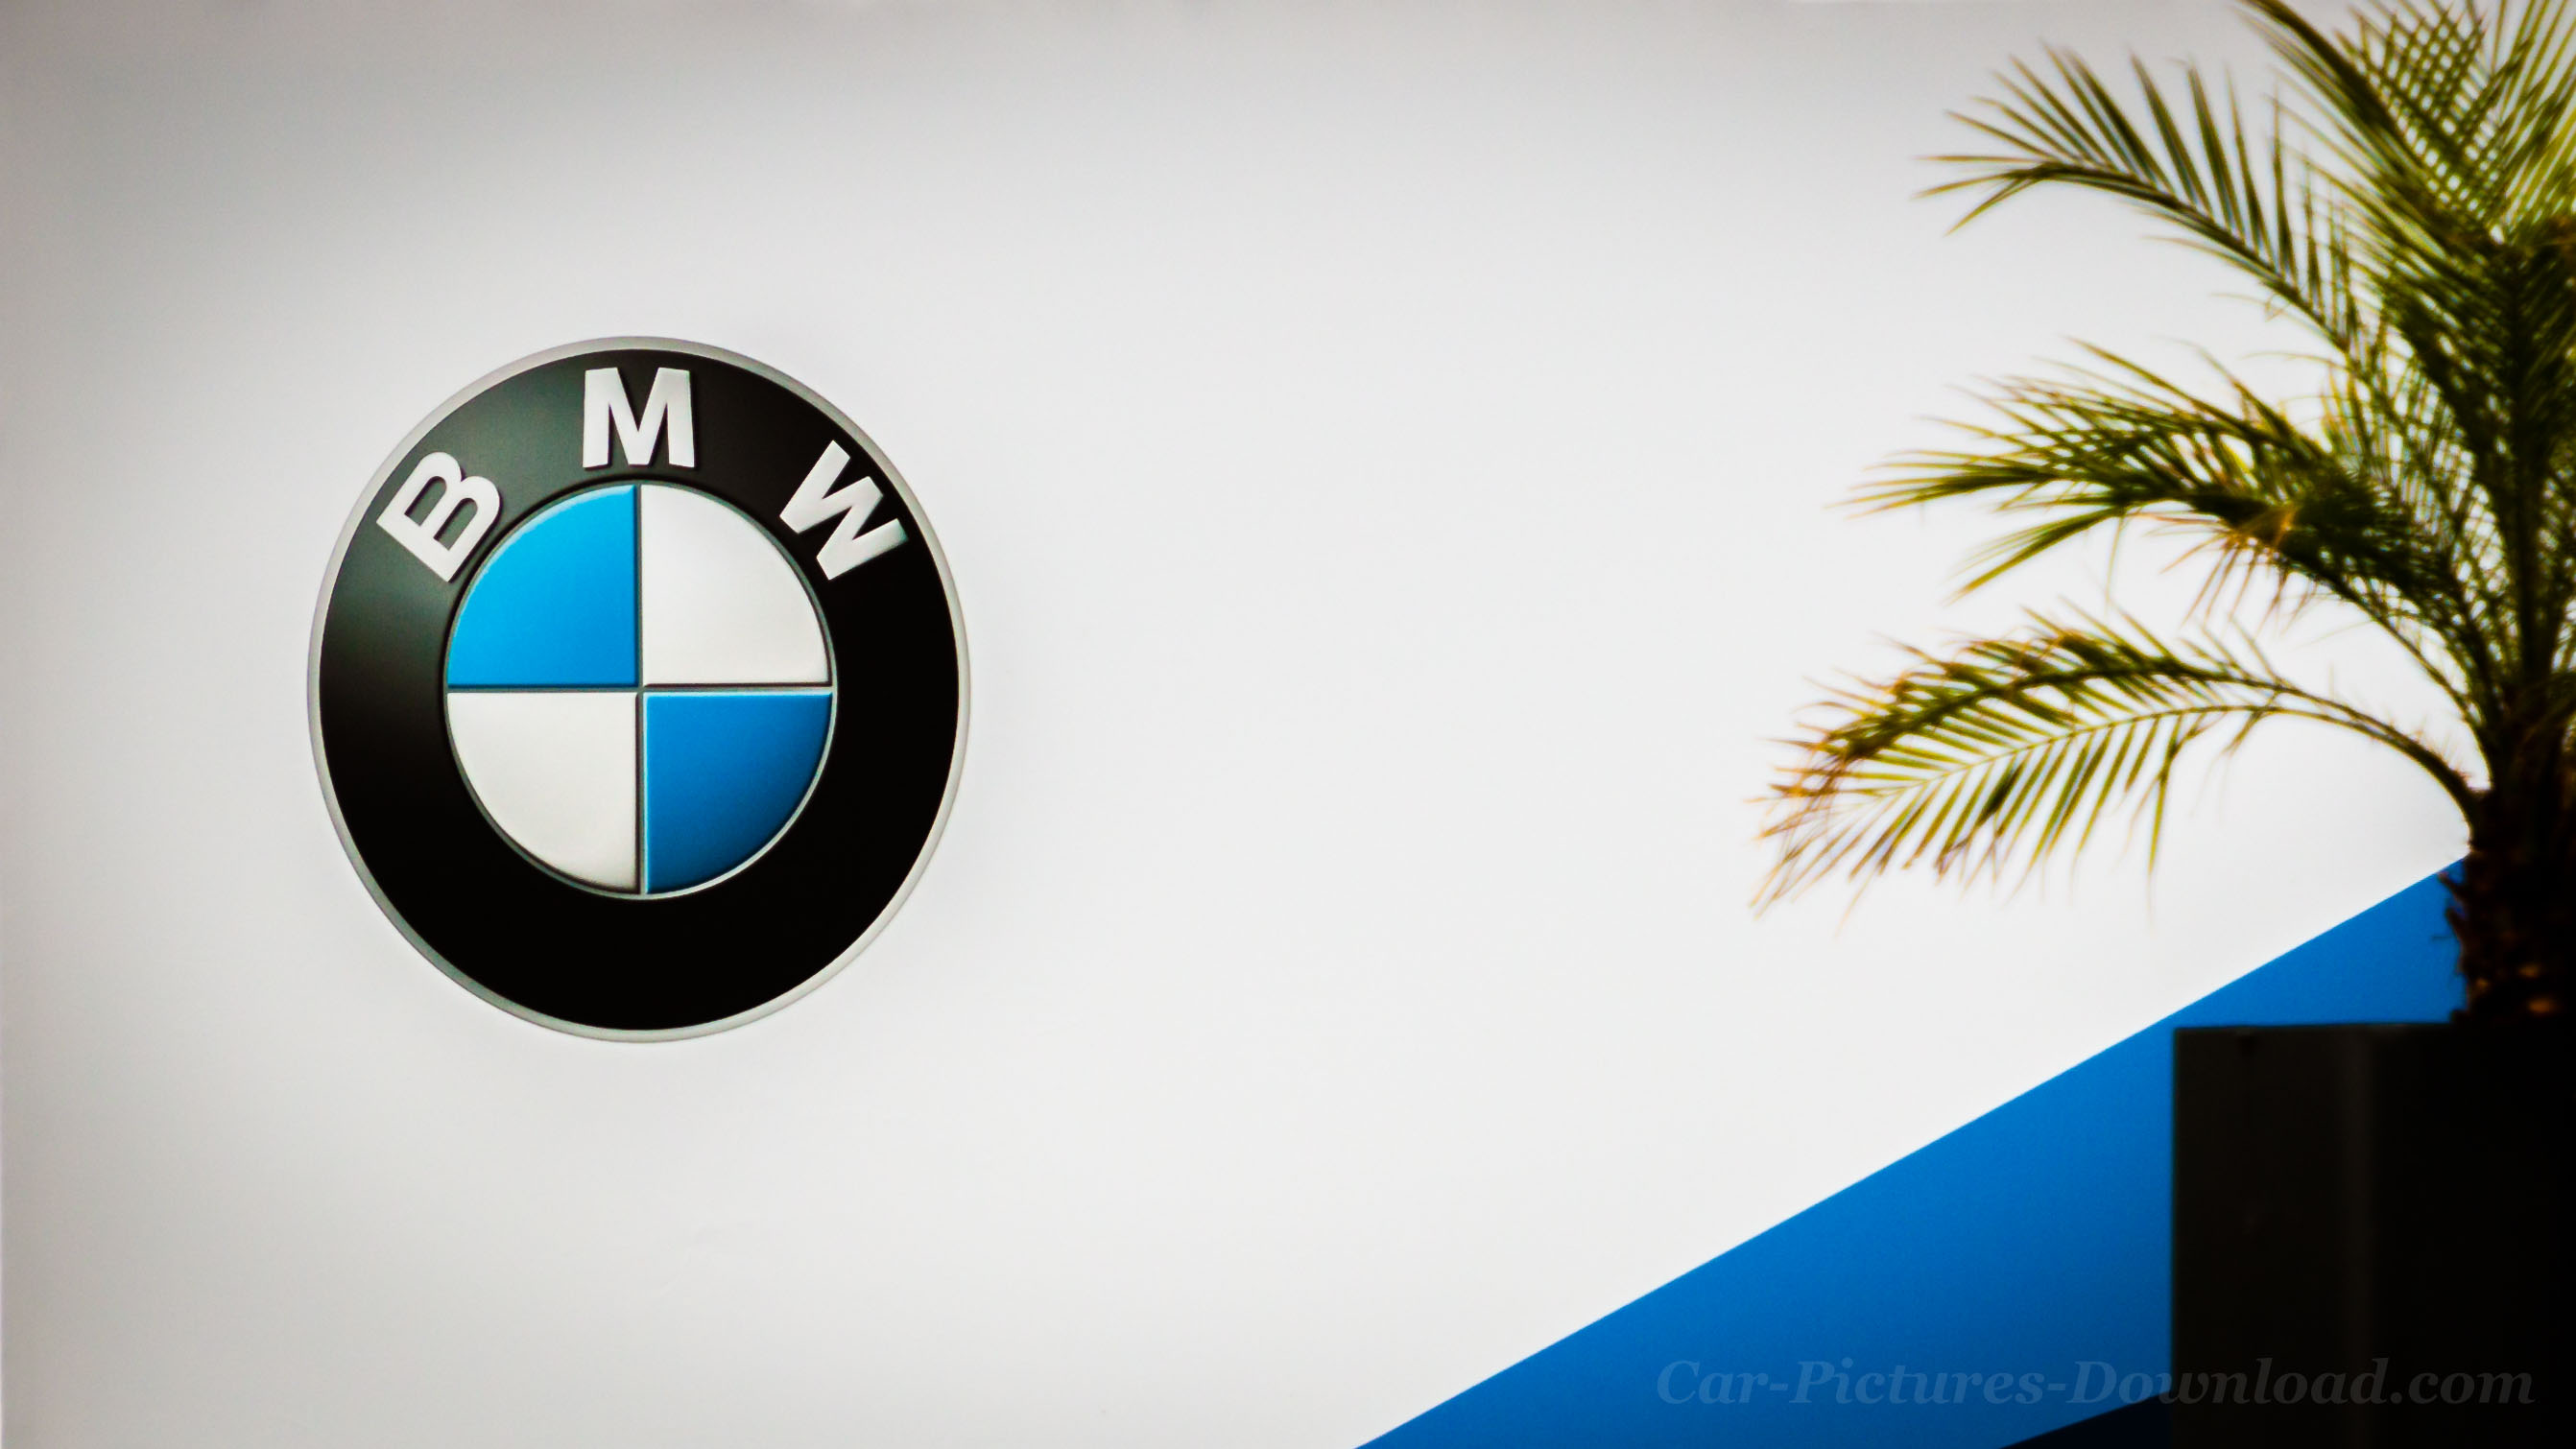 BMW Wallpaper Picture HD For All Devices